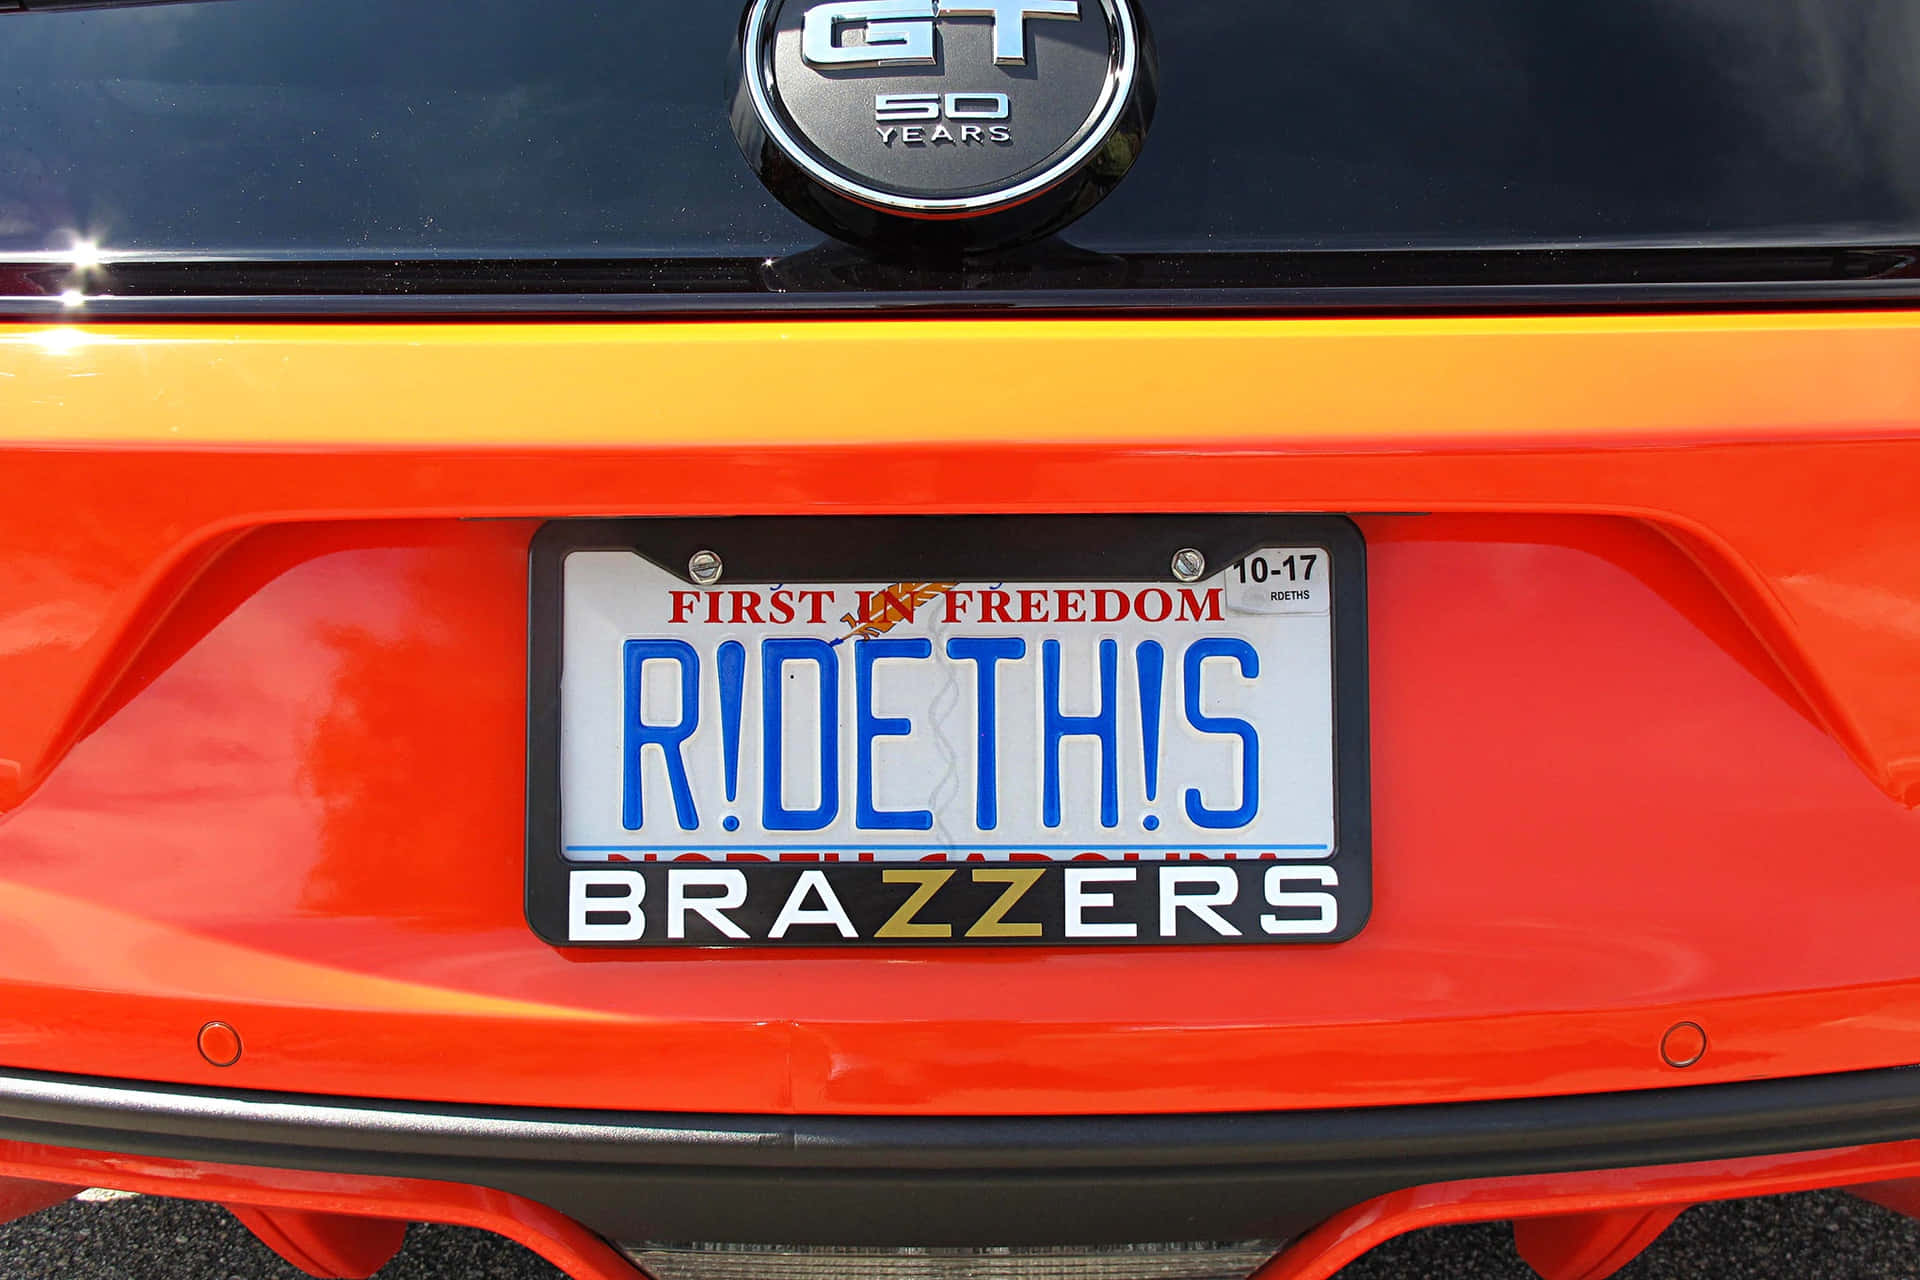 "Customizable License Plate Options"